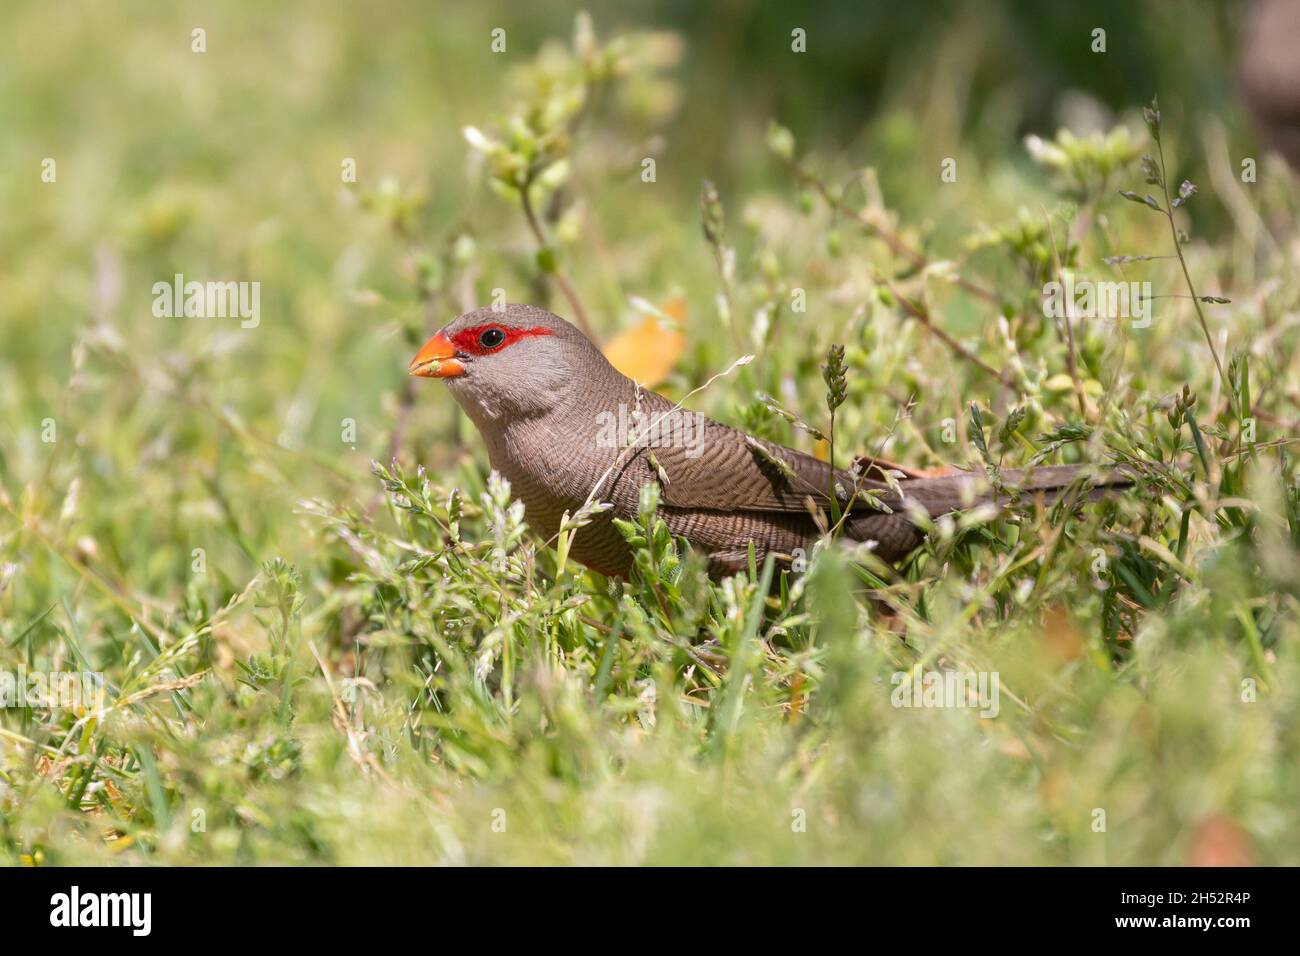 Common Waxbill or St Helena Waxbill (Estrilda astrild) a small estrildid finch foraging for seeds on grass in spring, Western Cape, South Africa Stock Photo